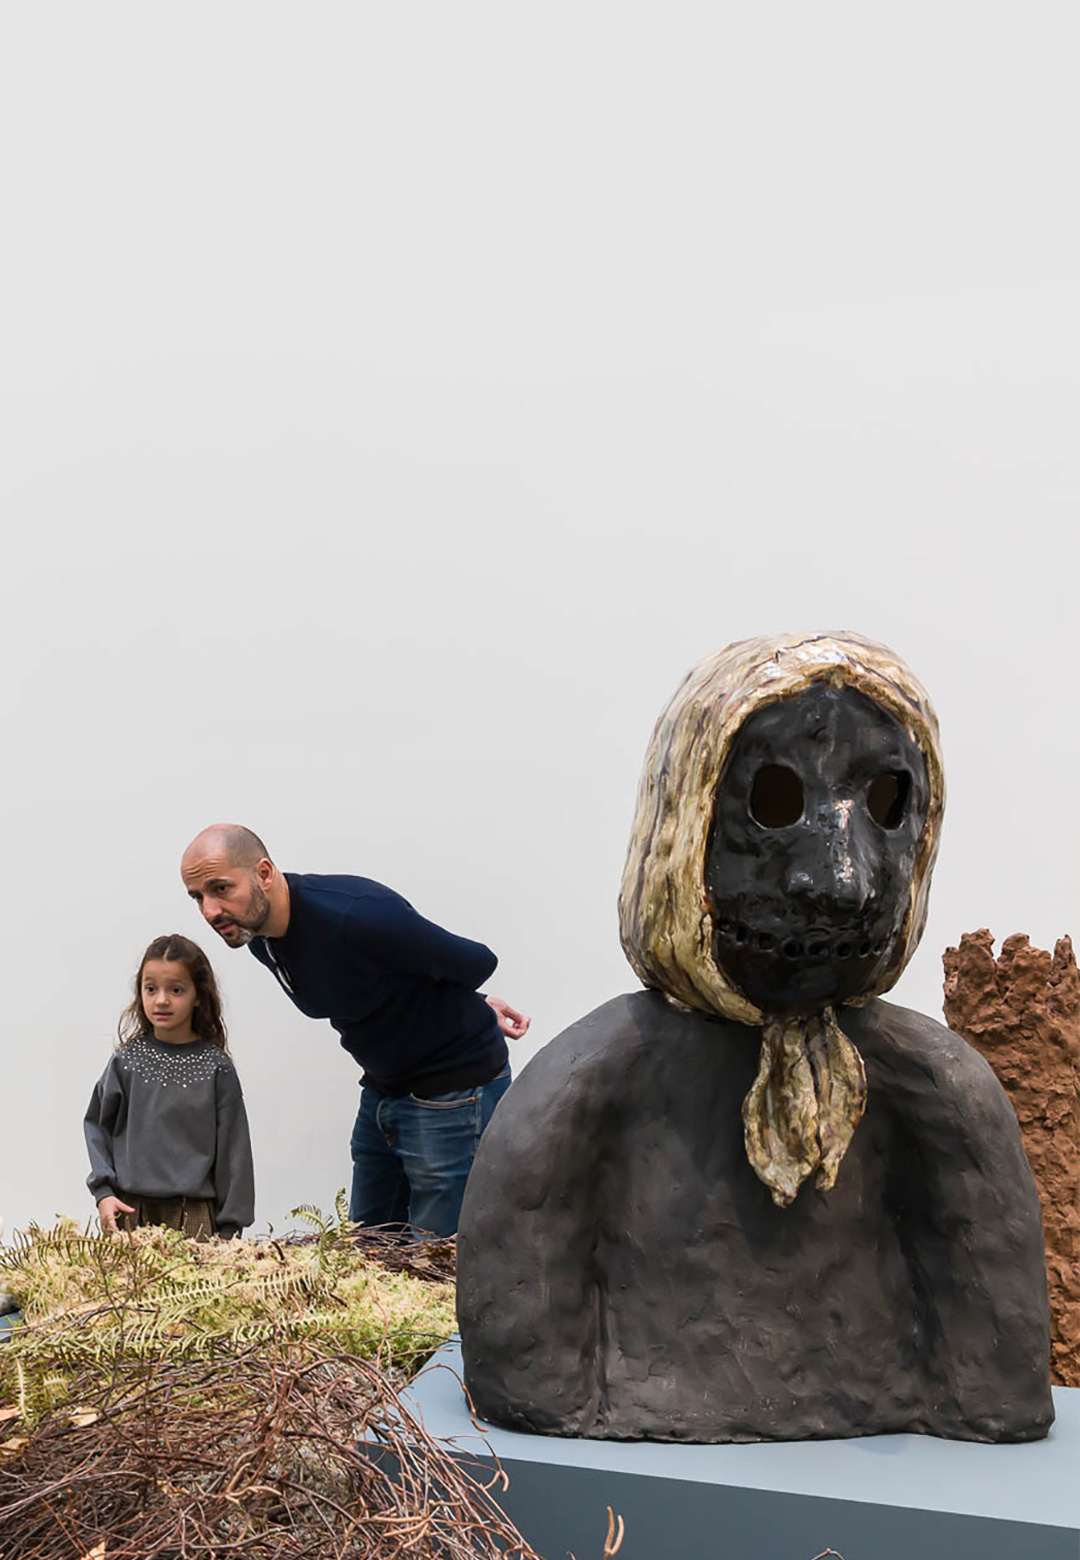 Hayward Gallery transforms into an other-worldly display of ceramics for 'Strange Clay'